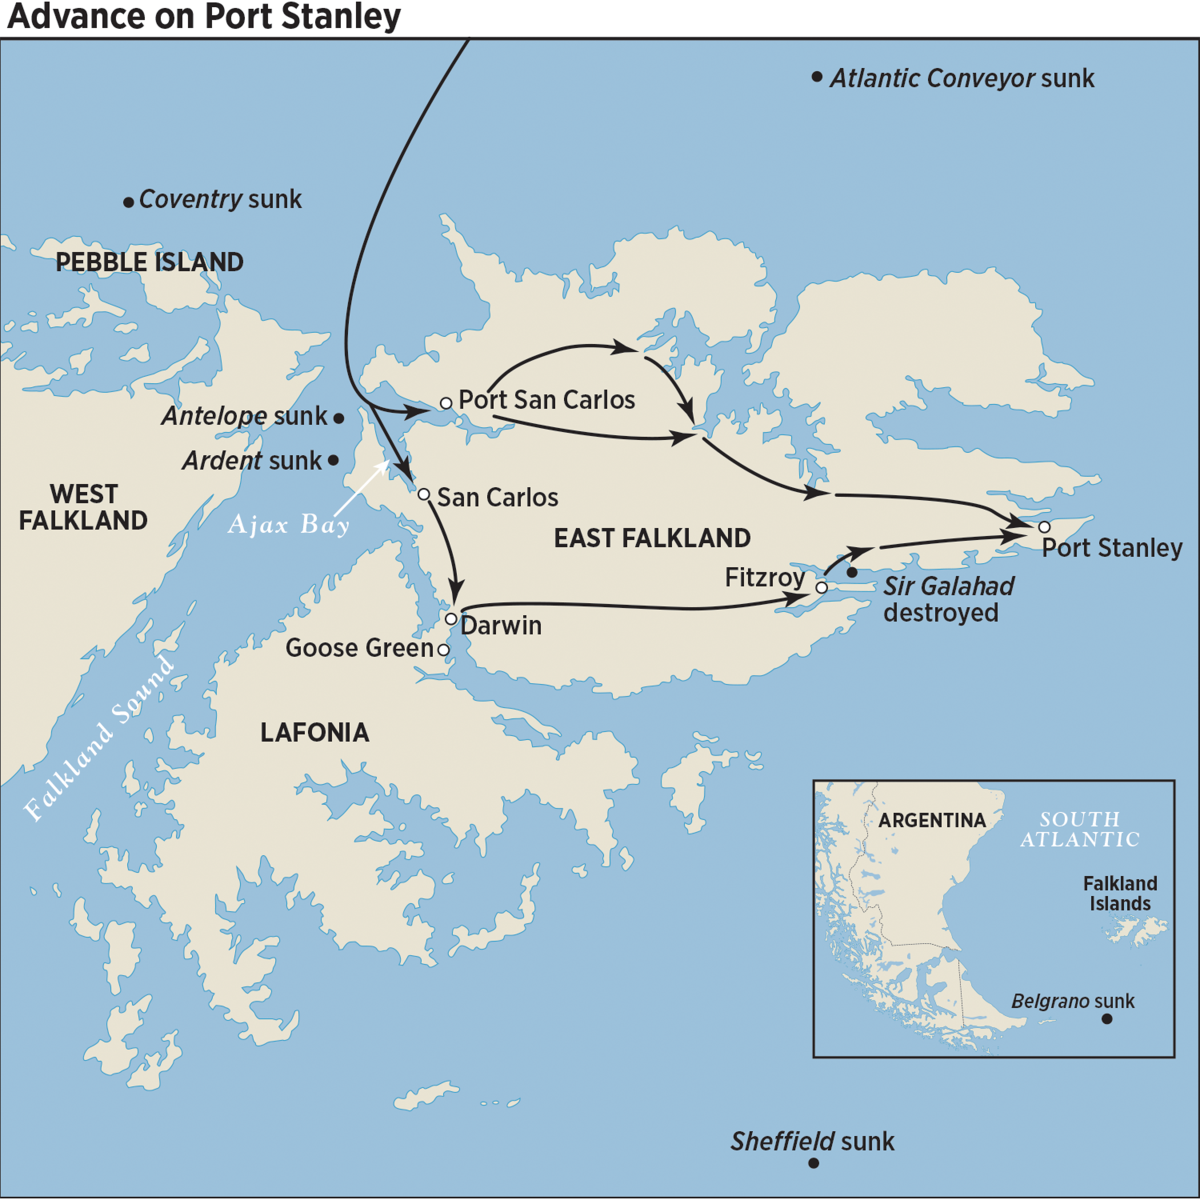 Map of the British Advance on Port Stanley during the Falklands Campaign